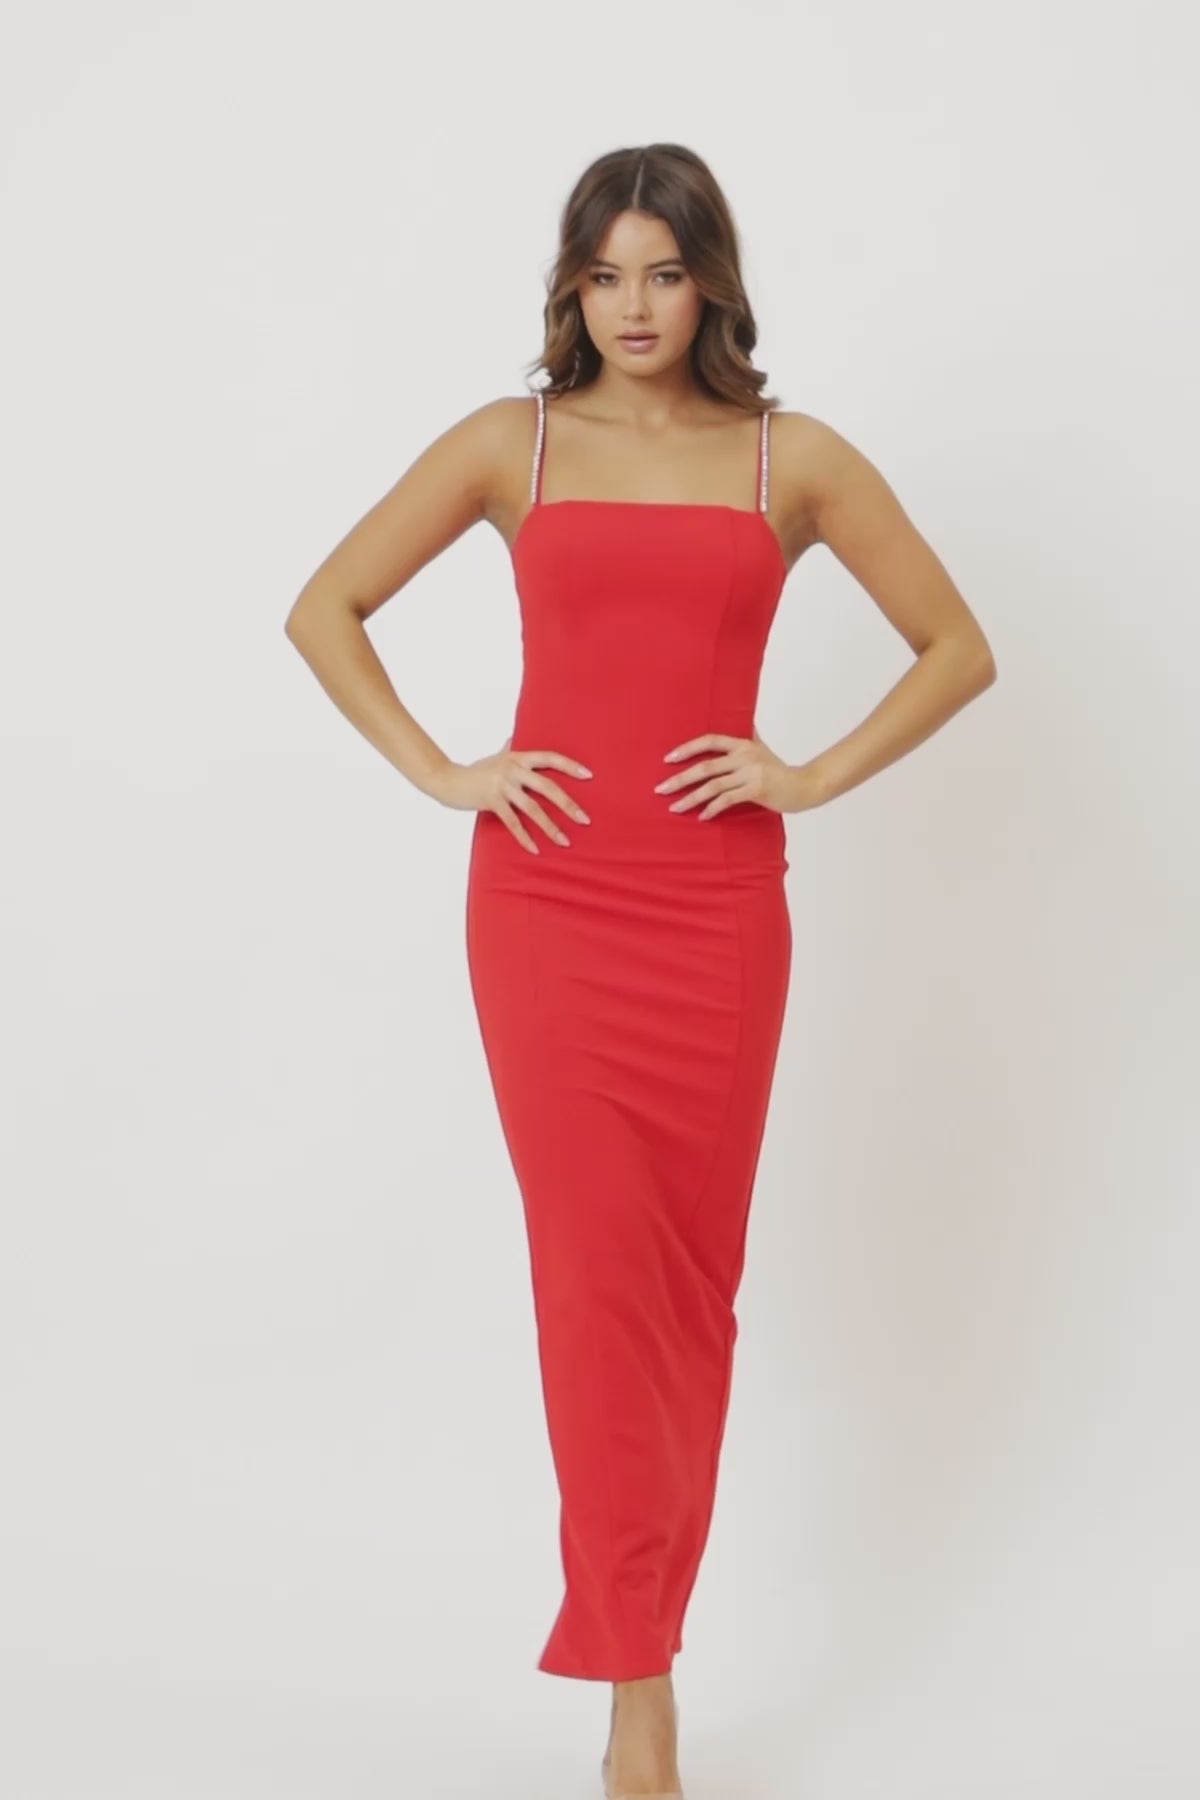 Lily Square Neck Dress red Video